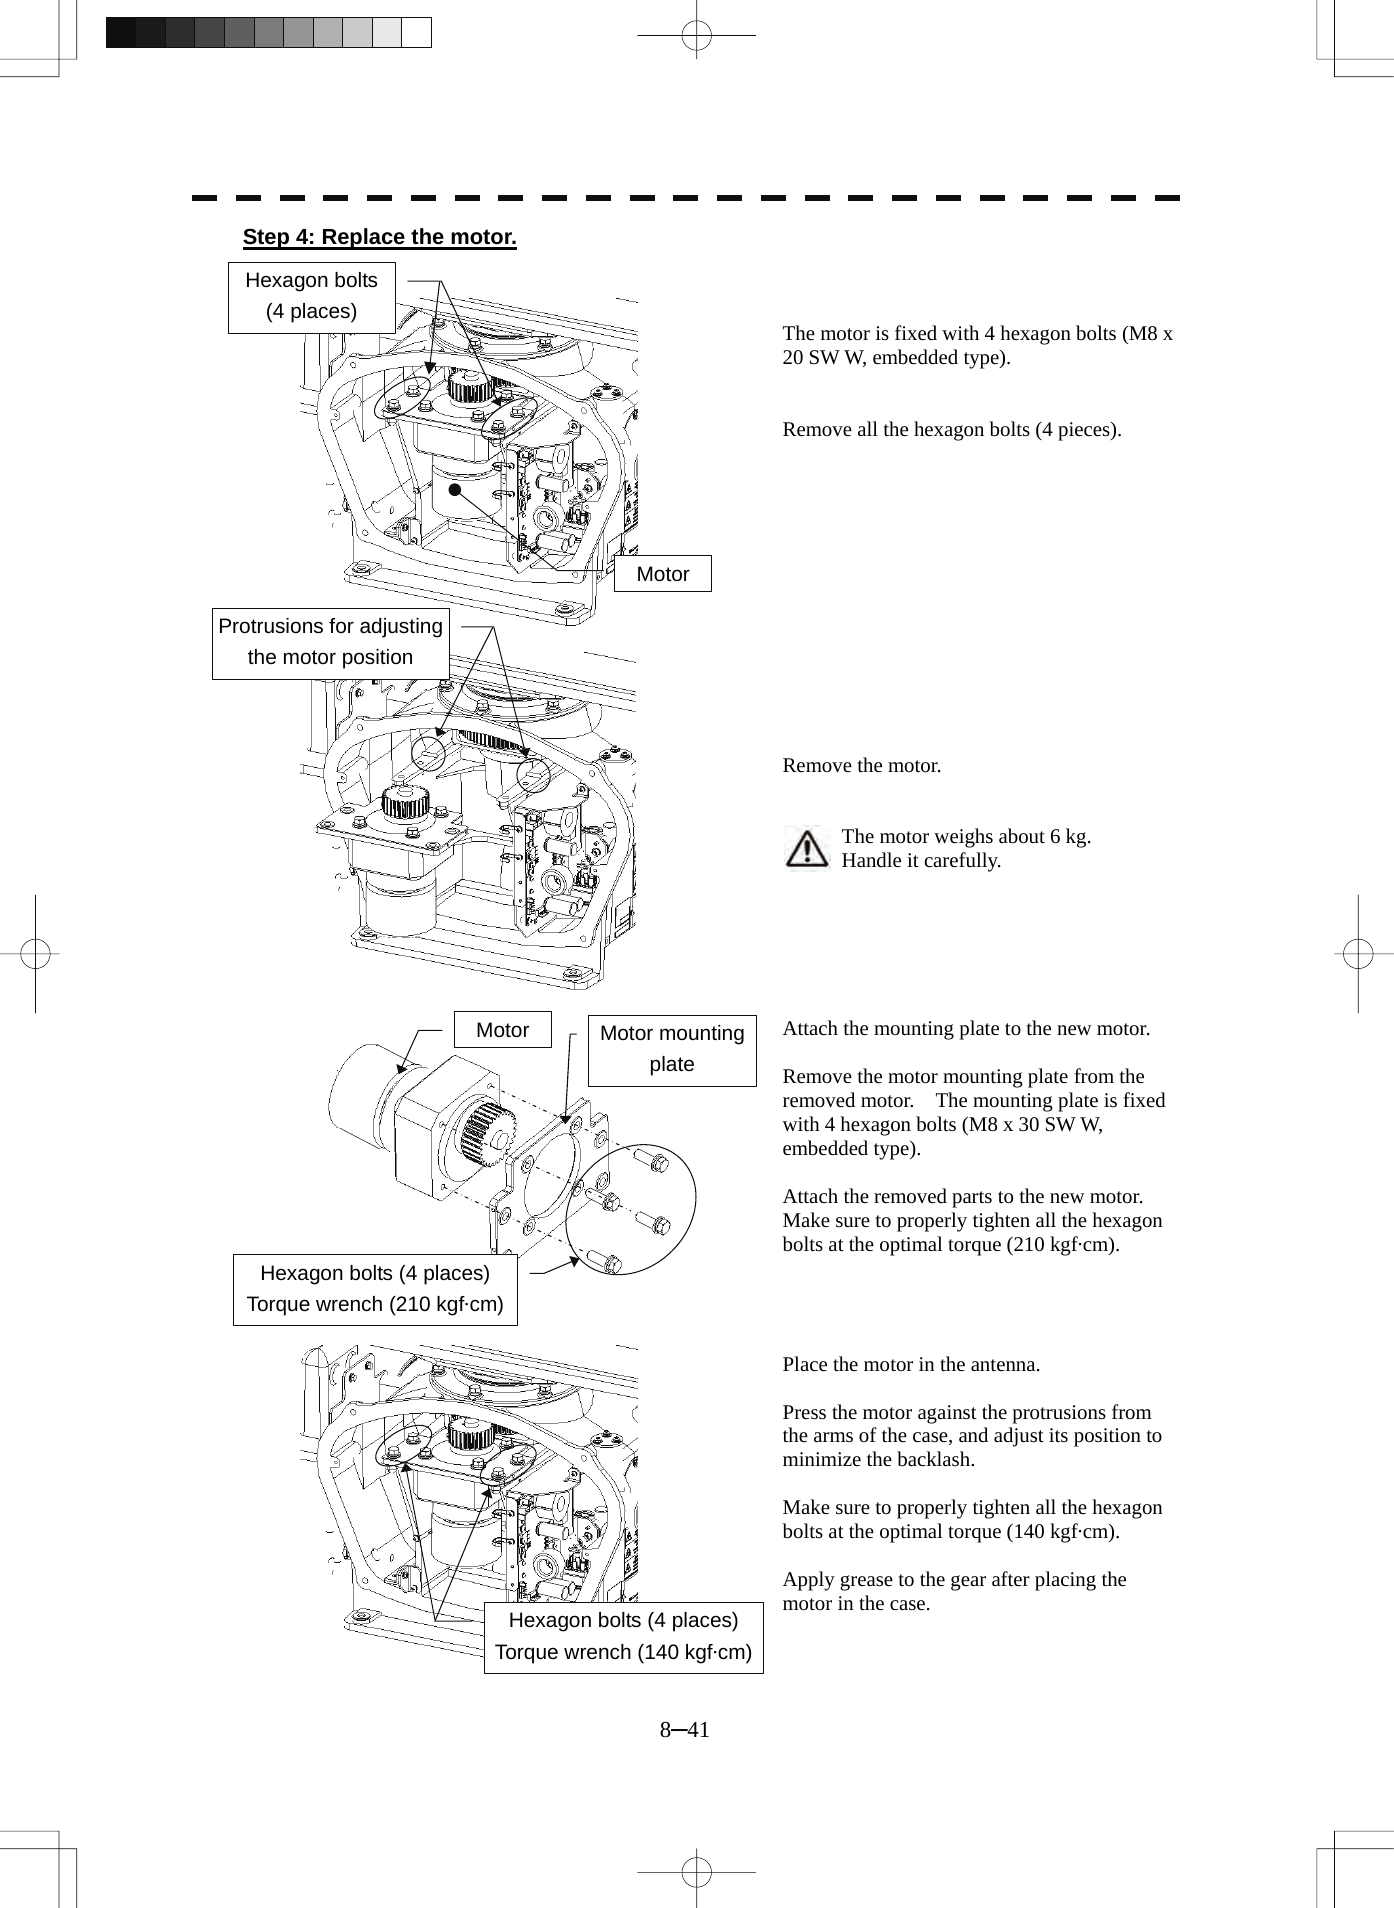  8─41 Step 4: Replace the motor.    The motor is fixed with 4 hexagon bolts (M8 x 20 SW W, embedded type).   Remove all the hexagon bolts (4 pieces).              Remove the motor.   The motor weighs about 6 kg. Handle it carefully.       Attach the mounting plate to the new motor.  Remove the motor mounting plate from the removed motor.    The mounting plate is fixed with 4 hexagon bolts (M8 x 30 SW W, embedded type).  Attach the removed parts to the new motor. Make sure to properly tighten all the hexagon bolts at the optimal torque (210 kgf·cm).     Place the motor in the antenna.  Press the motor against the protrusions from the arms of the case, and adjust its position to minimize the backlash.  Make sure to properly tighten all the hexagon bolts at the optimal torque (140 kgf·cm).  Apply grease to the gear after placing the motor in the case. Motor Hexagon bolts   (4 places) Protrusions for adjusting the motor position Hexagon bolts (4 places) Torque wrench (140 kgf·cm)Hexagon bolts (4 places) Torque wrench (210 kgf·cm)Motor  Motor mounting plate 